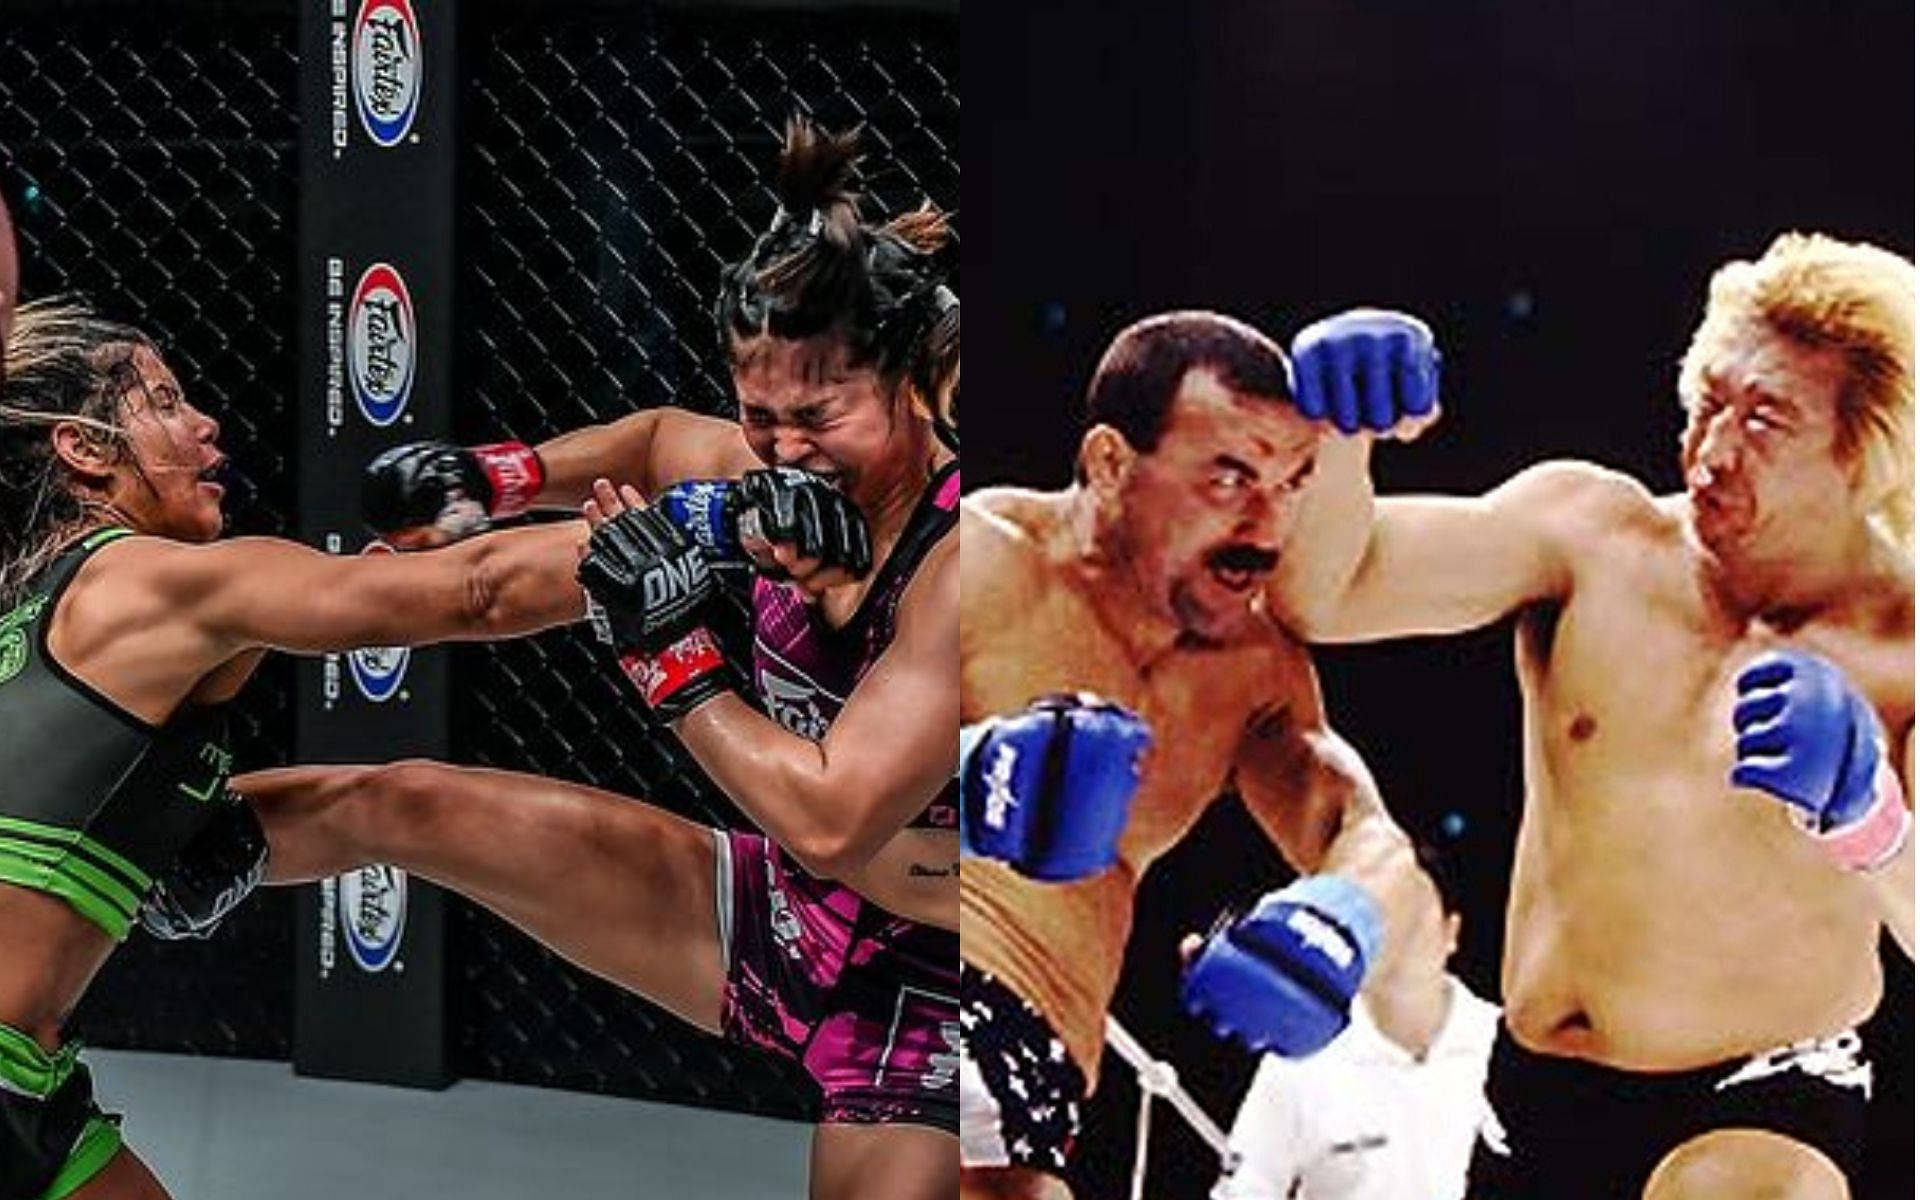 Comparison Photo With Don Frye Wallpaper